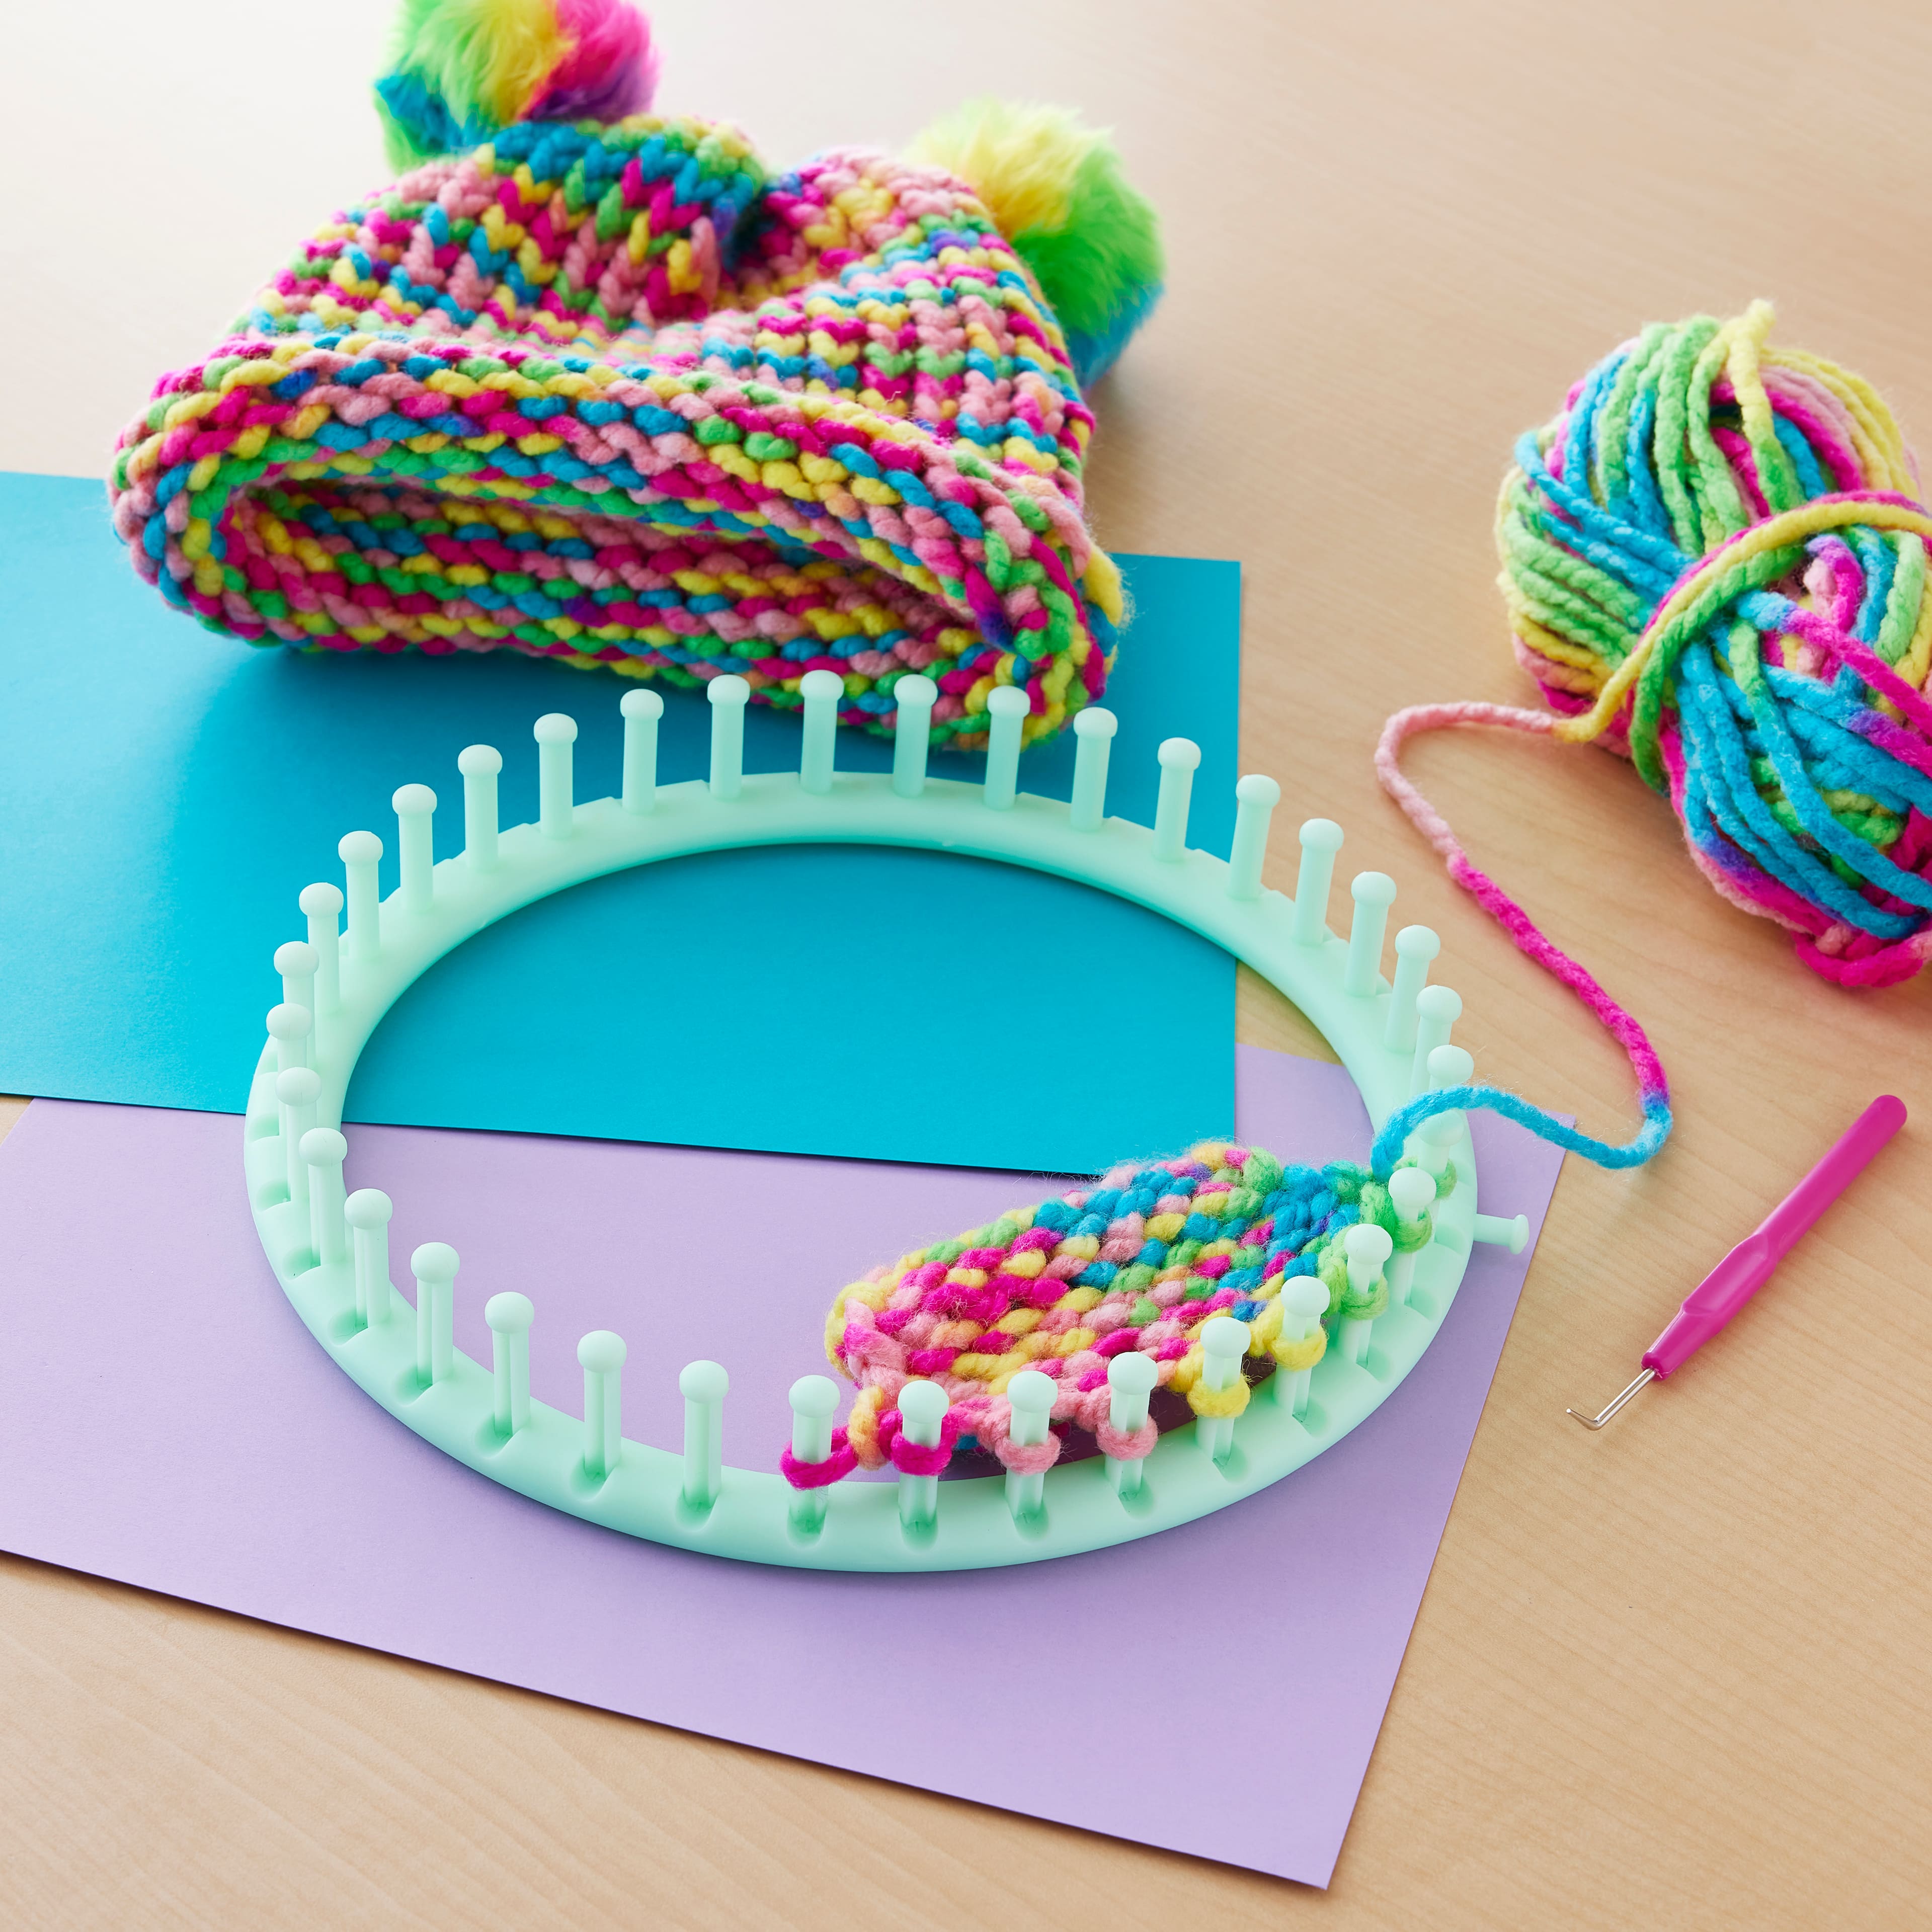  Creativity for Kids Quick Knit Loom Kit - Knitting Kit for Kids,  Make Your Own Pom Pom Hat And Accessories, Knitting Loom Crafts for Kids :  Everything Else